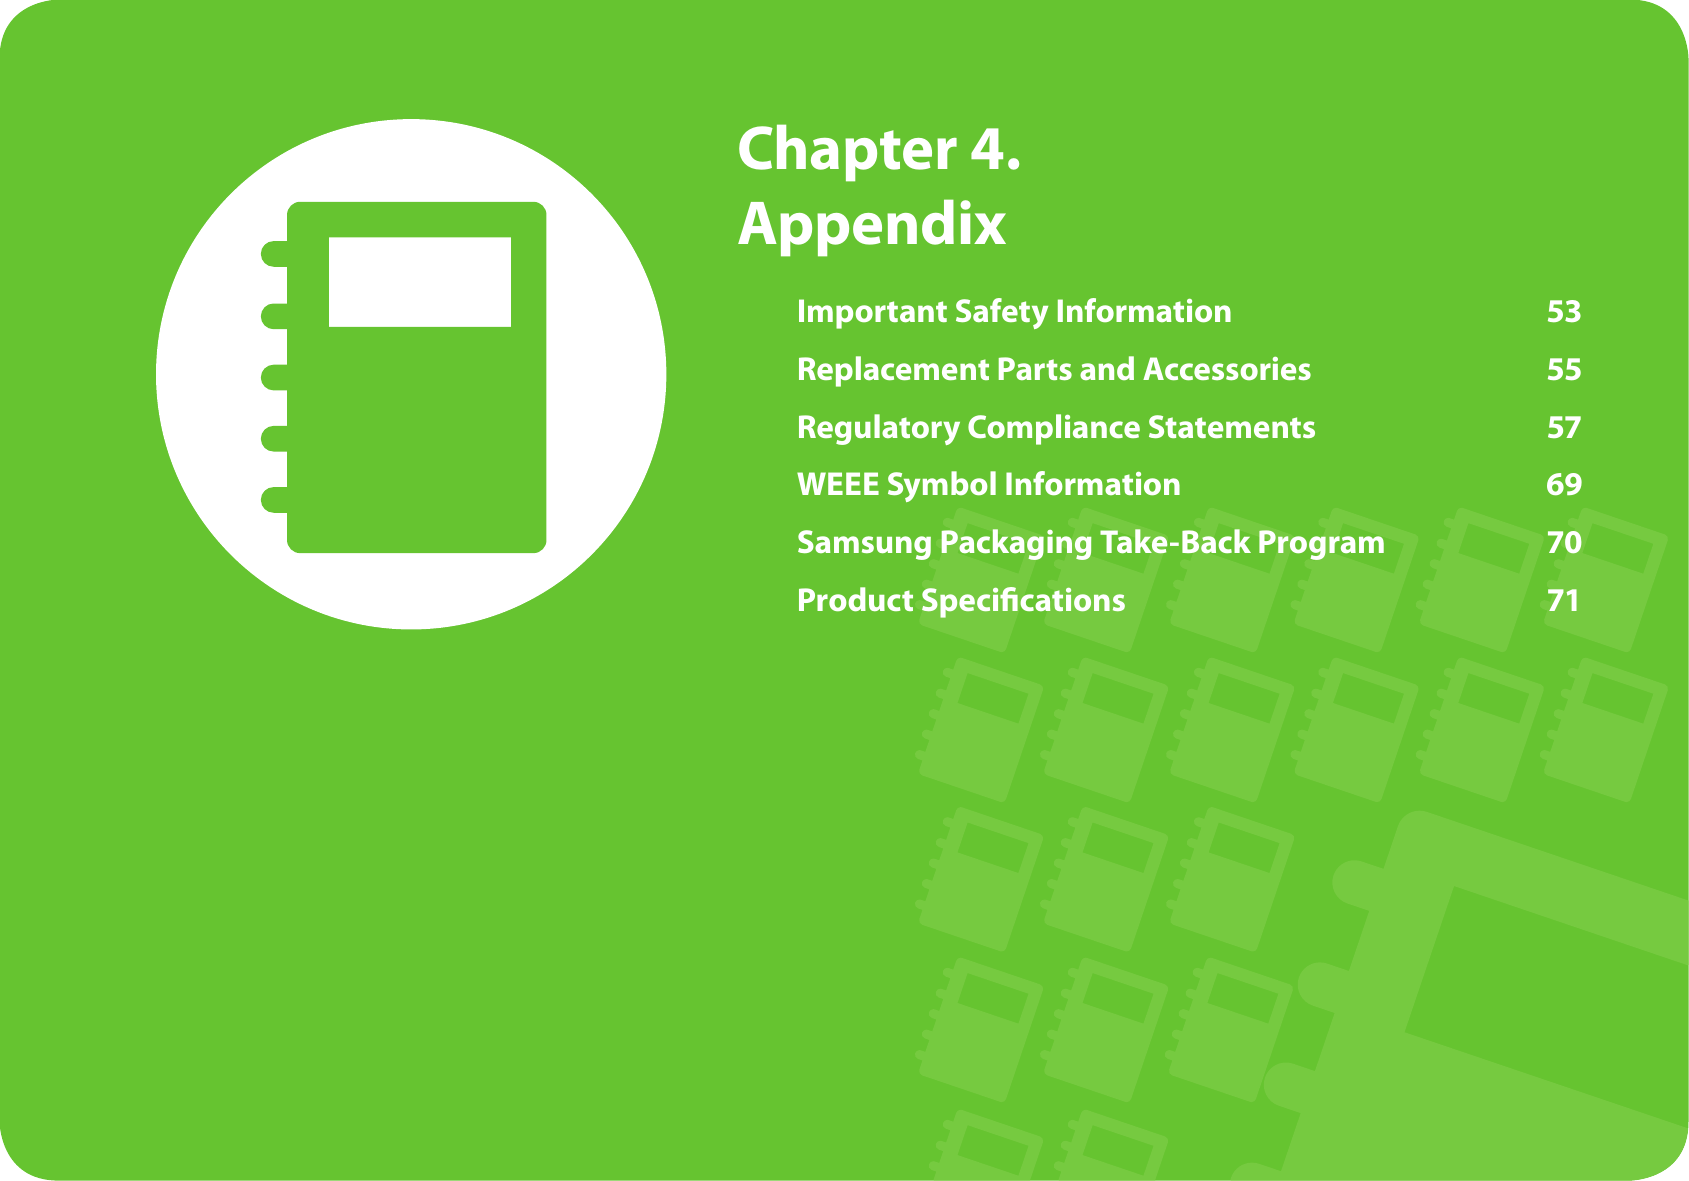  Chapter 4. AppendixImportant Safety Information  53Replacement Parts and Accessories  55Regulatory Compliance Statements  57WEEE Symbol Information  69Samsung Packaging Take-Back Program  70Product Speci cations  71